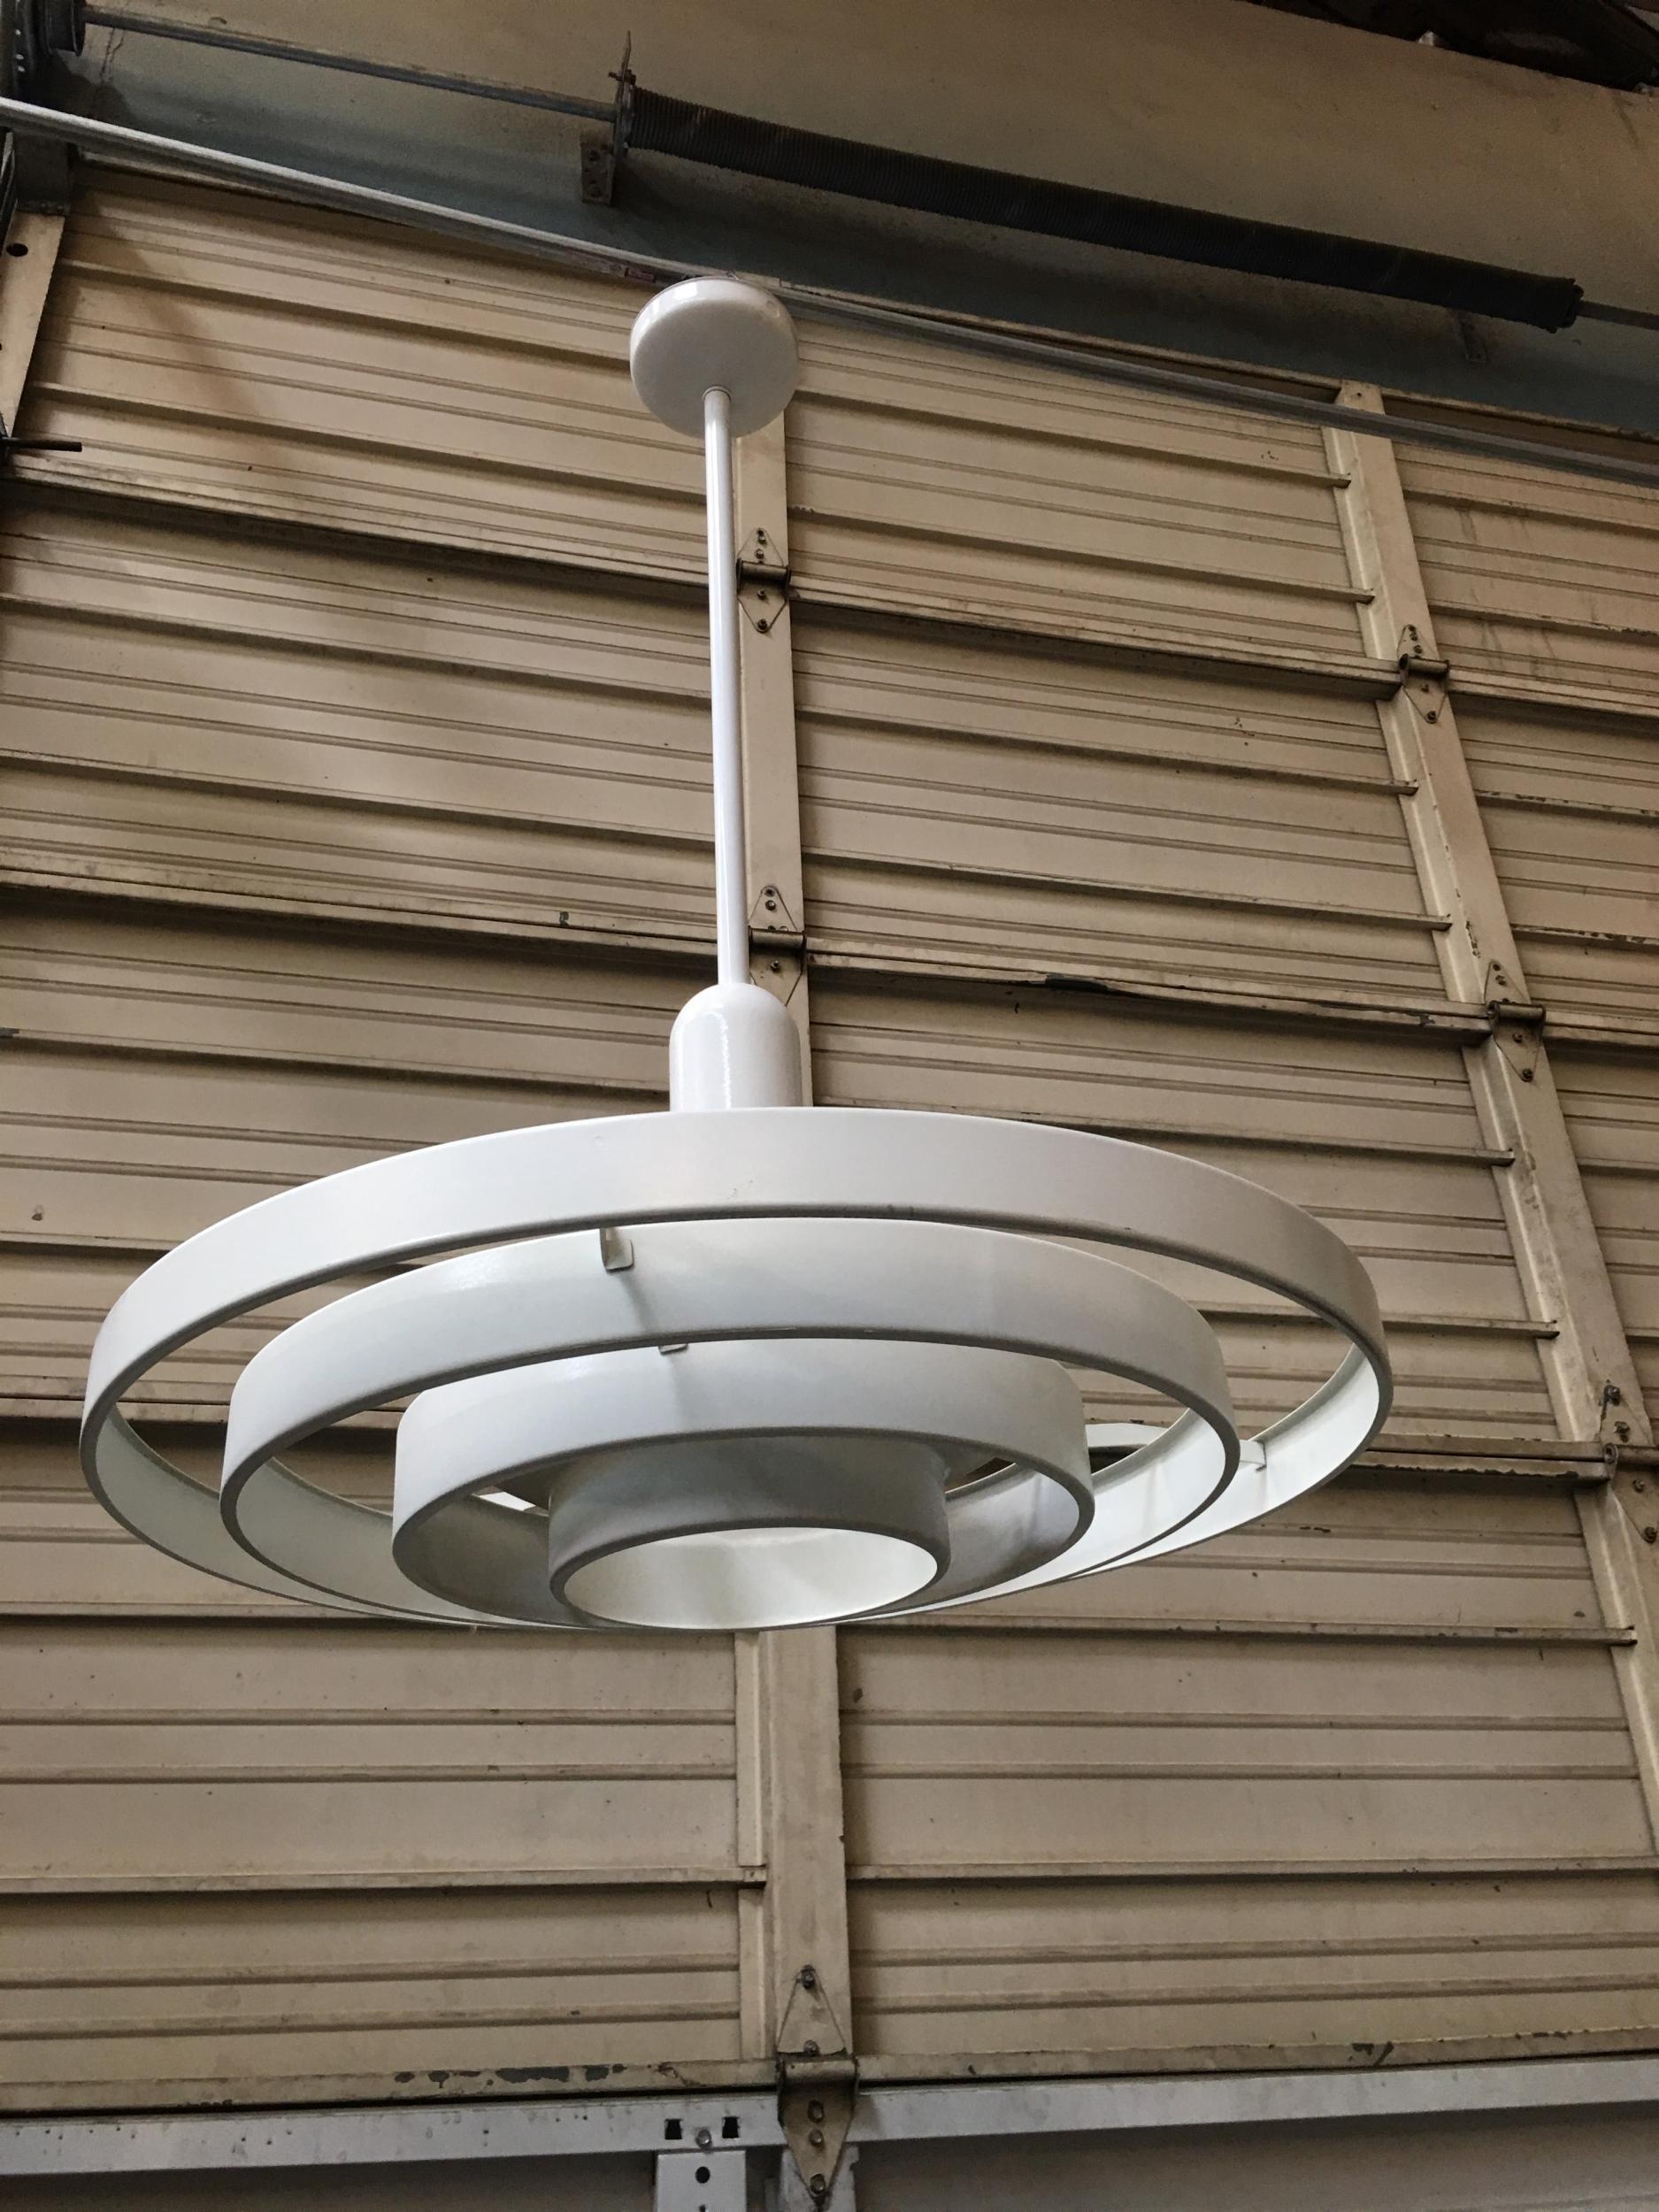 Kurt Versen designed “Saturn“ ceiling light featuring a stacked steel ring light shade suspended by wire to focused light socket. All together this light fixture is 36.5“ tall perfect for large vaulted ceilings.



These pendant ceiling lights